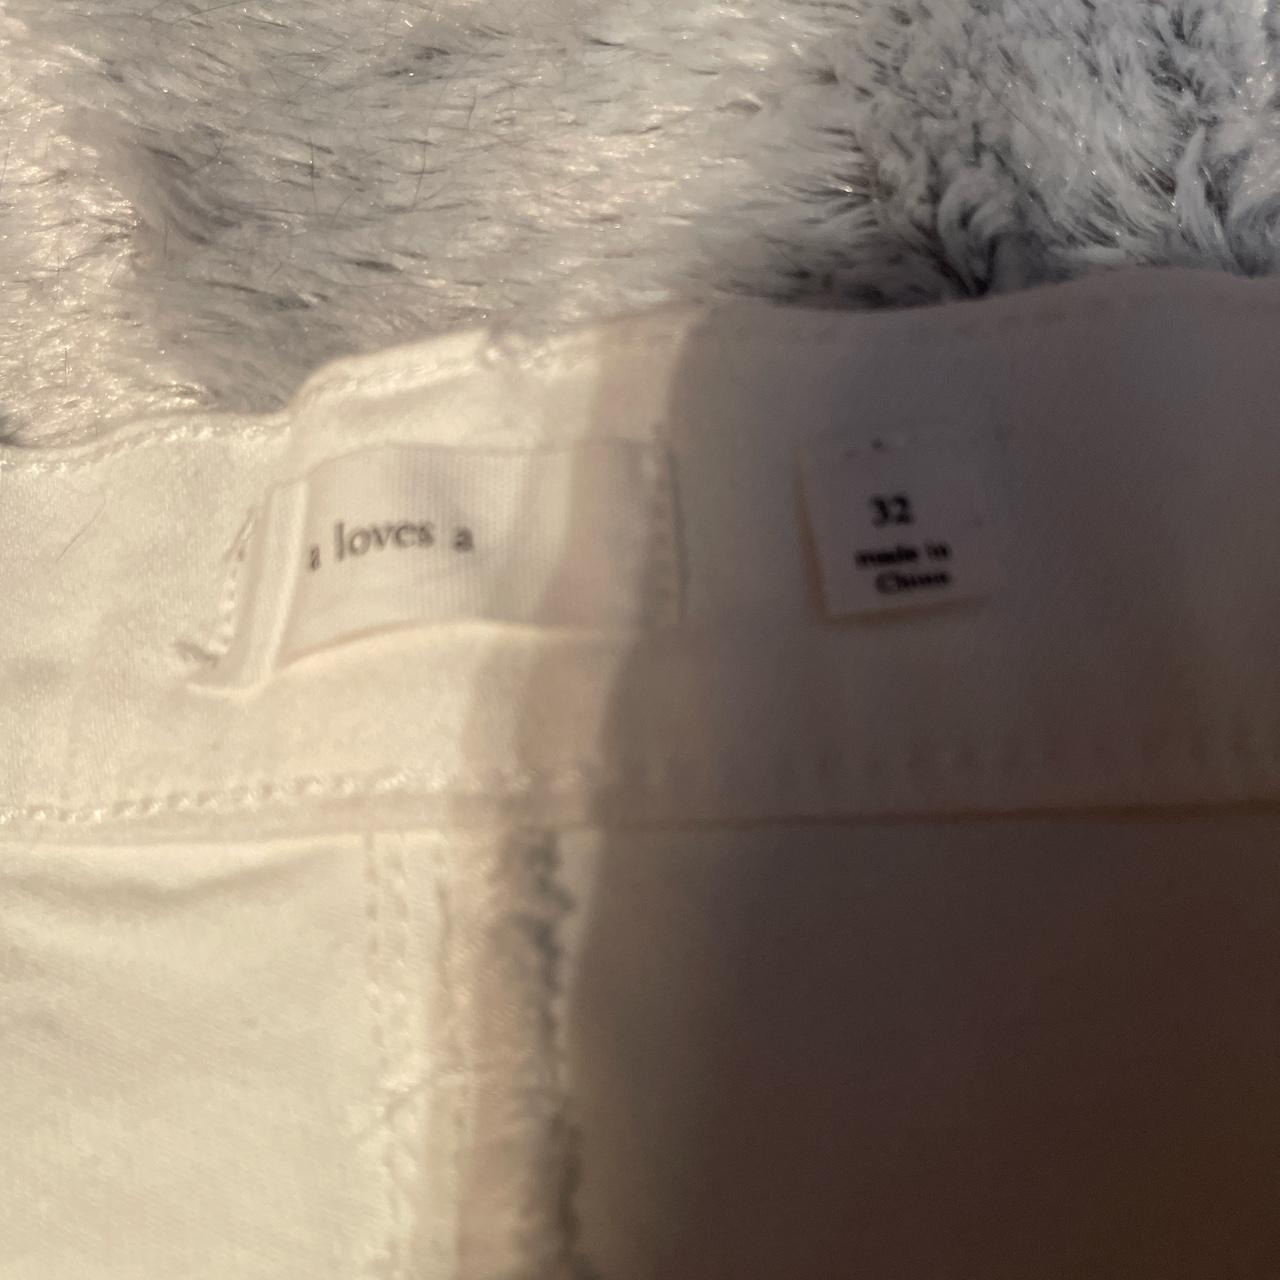 A Loves A Women's White and Grey Jeans (4)